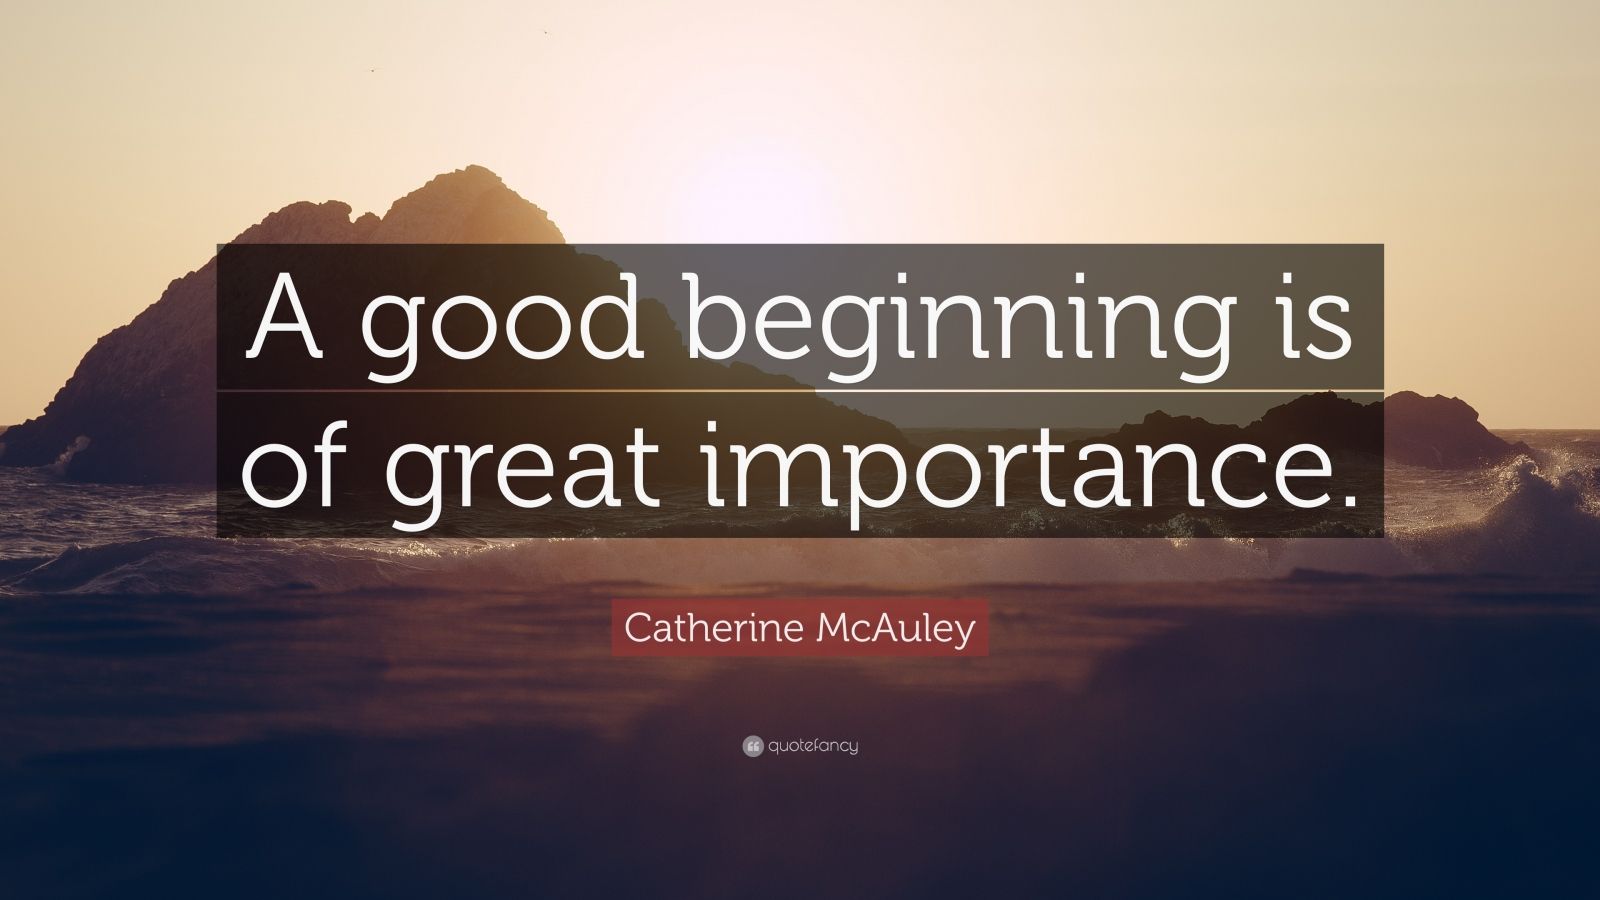 Catherine McAuley Quote: "A good beginning is of great importance." (12 wallpapers) - Quotefancy